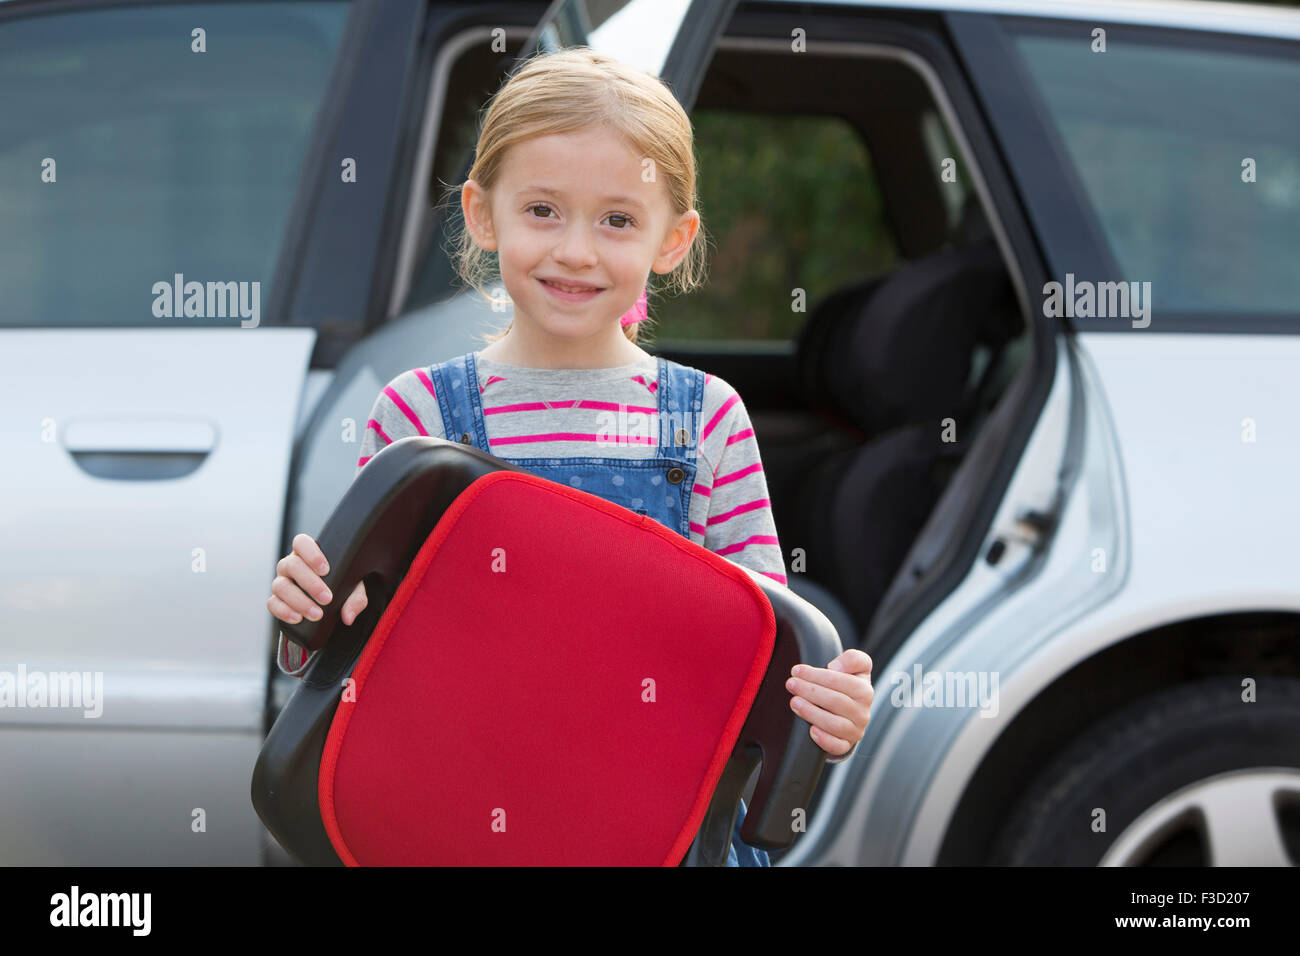 Portrait Of Girl Holding Booster Seat Standing Next To Car Stock Photo